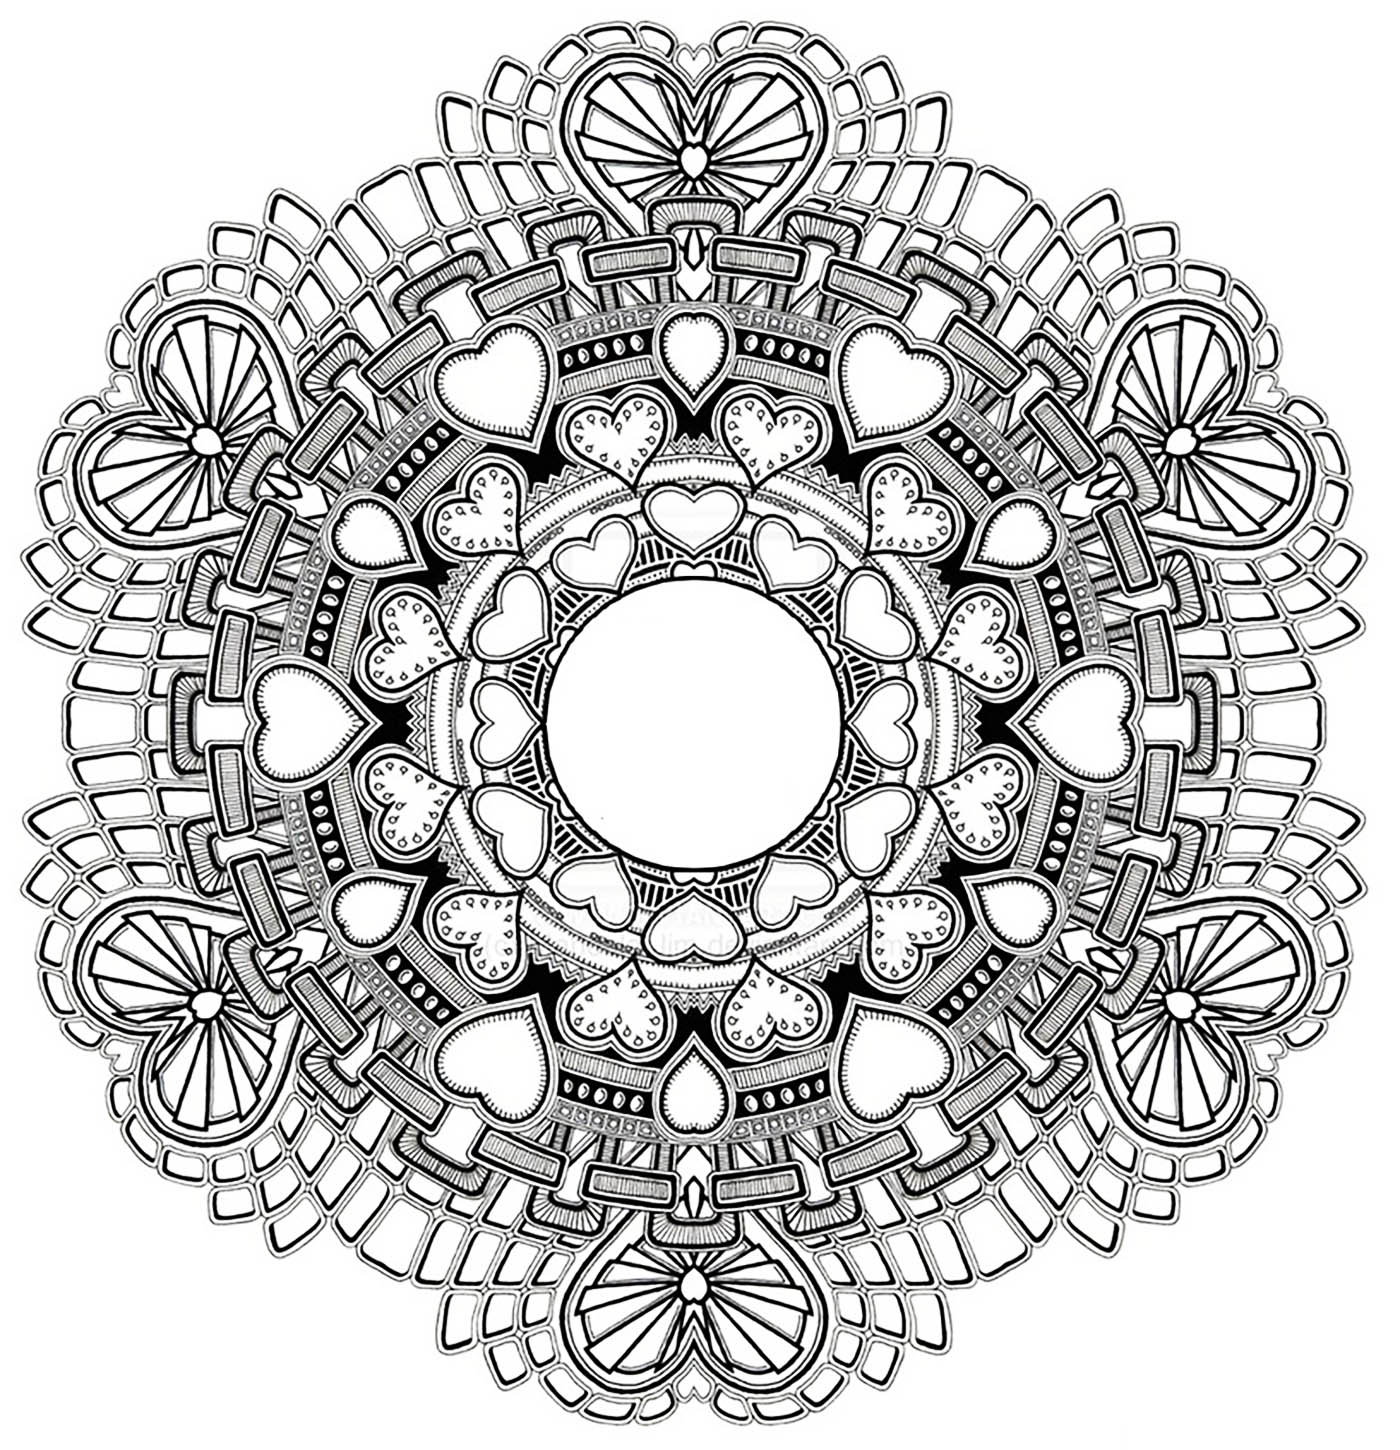 Download Mandala to download in pdf 3 - M&alas Adult Coloring Pages